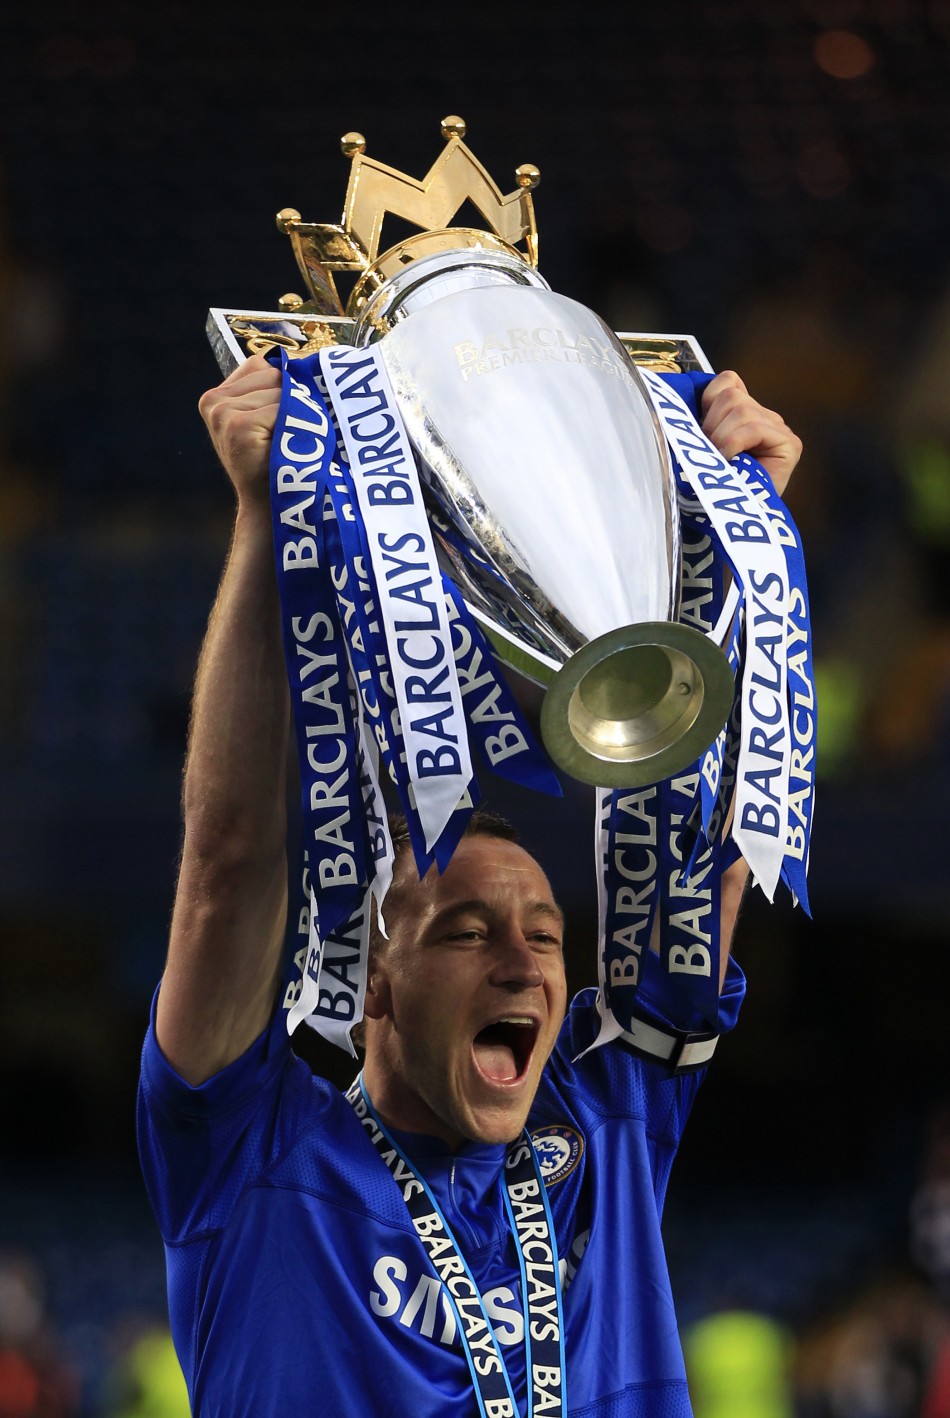 Suspended Terry Will Lift Champions League Trophy, if Chelsea Beat Bayern